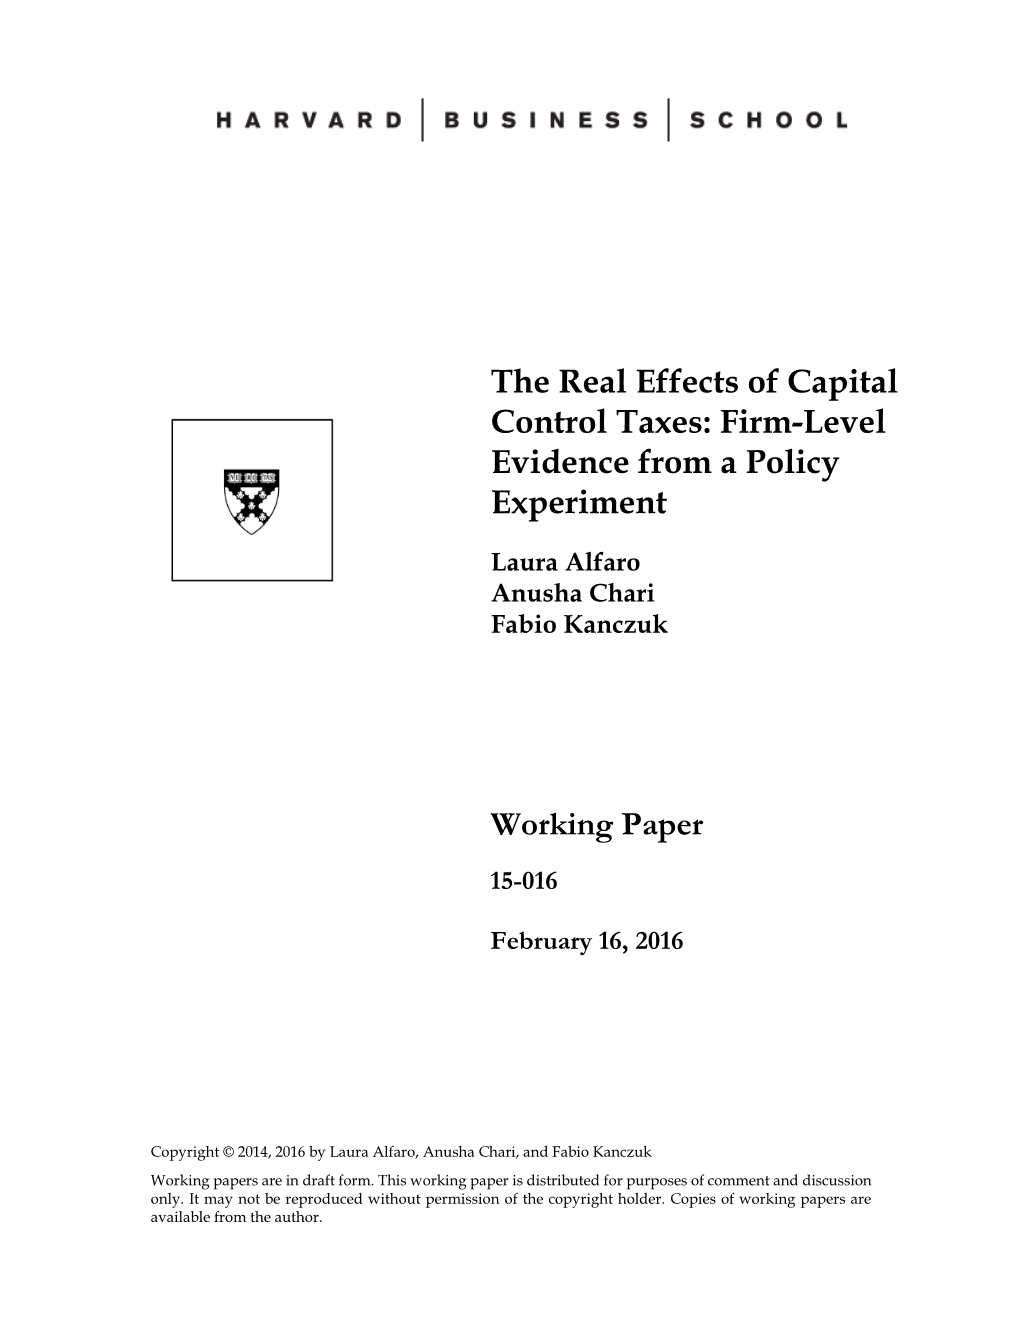 The Real Effects of Capital Control Taxes: Firm-Level Evidence from a Policy Experiment